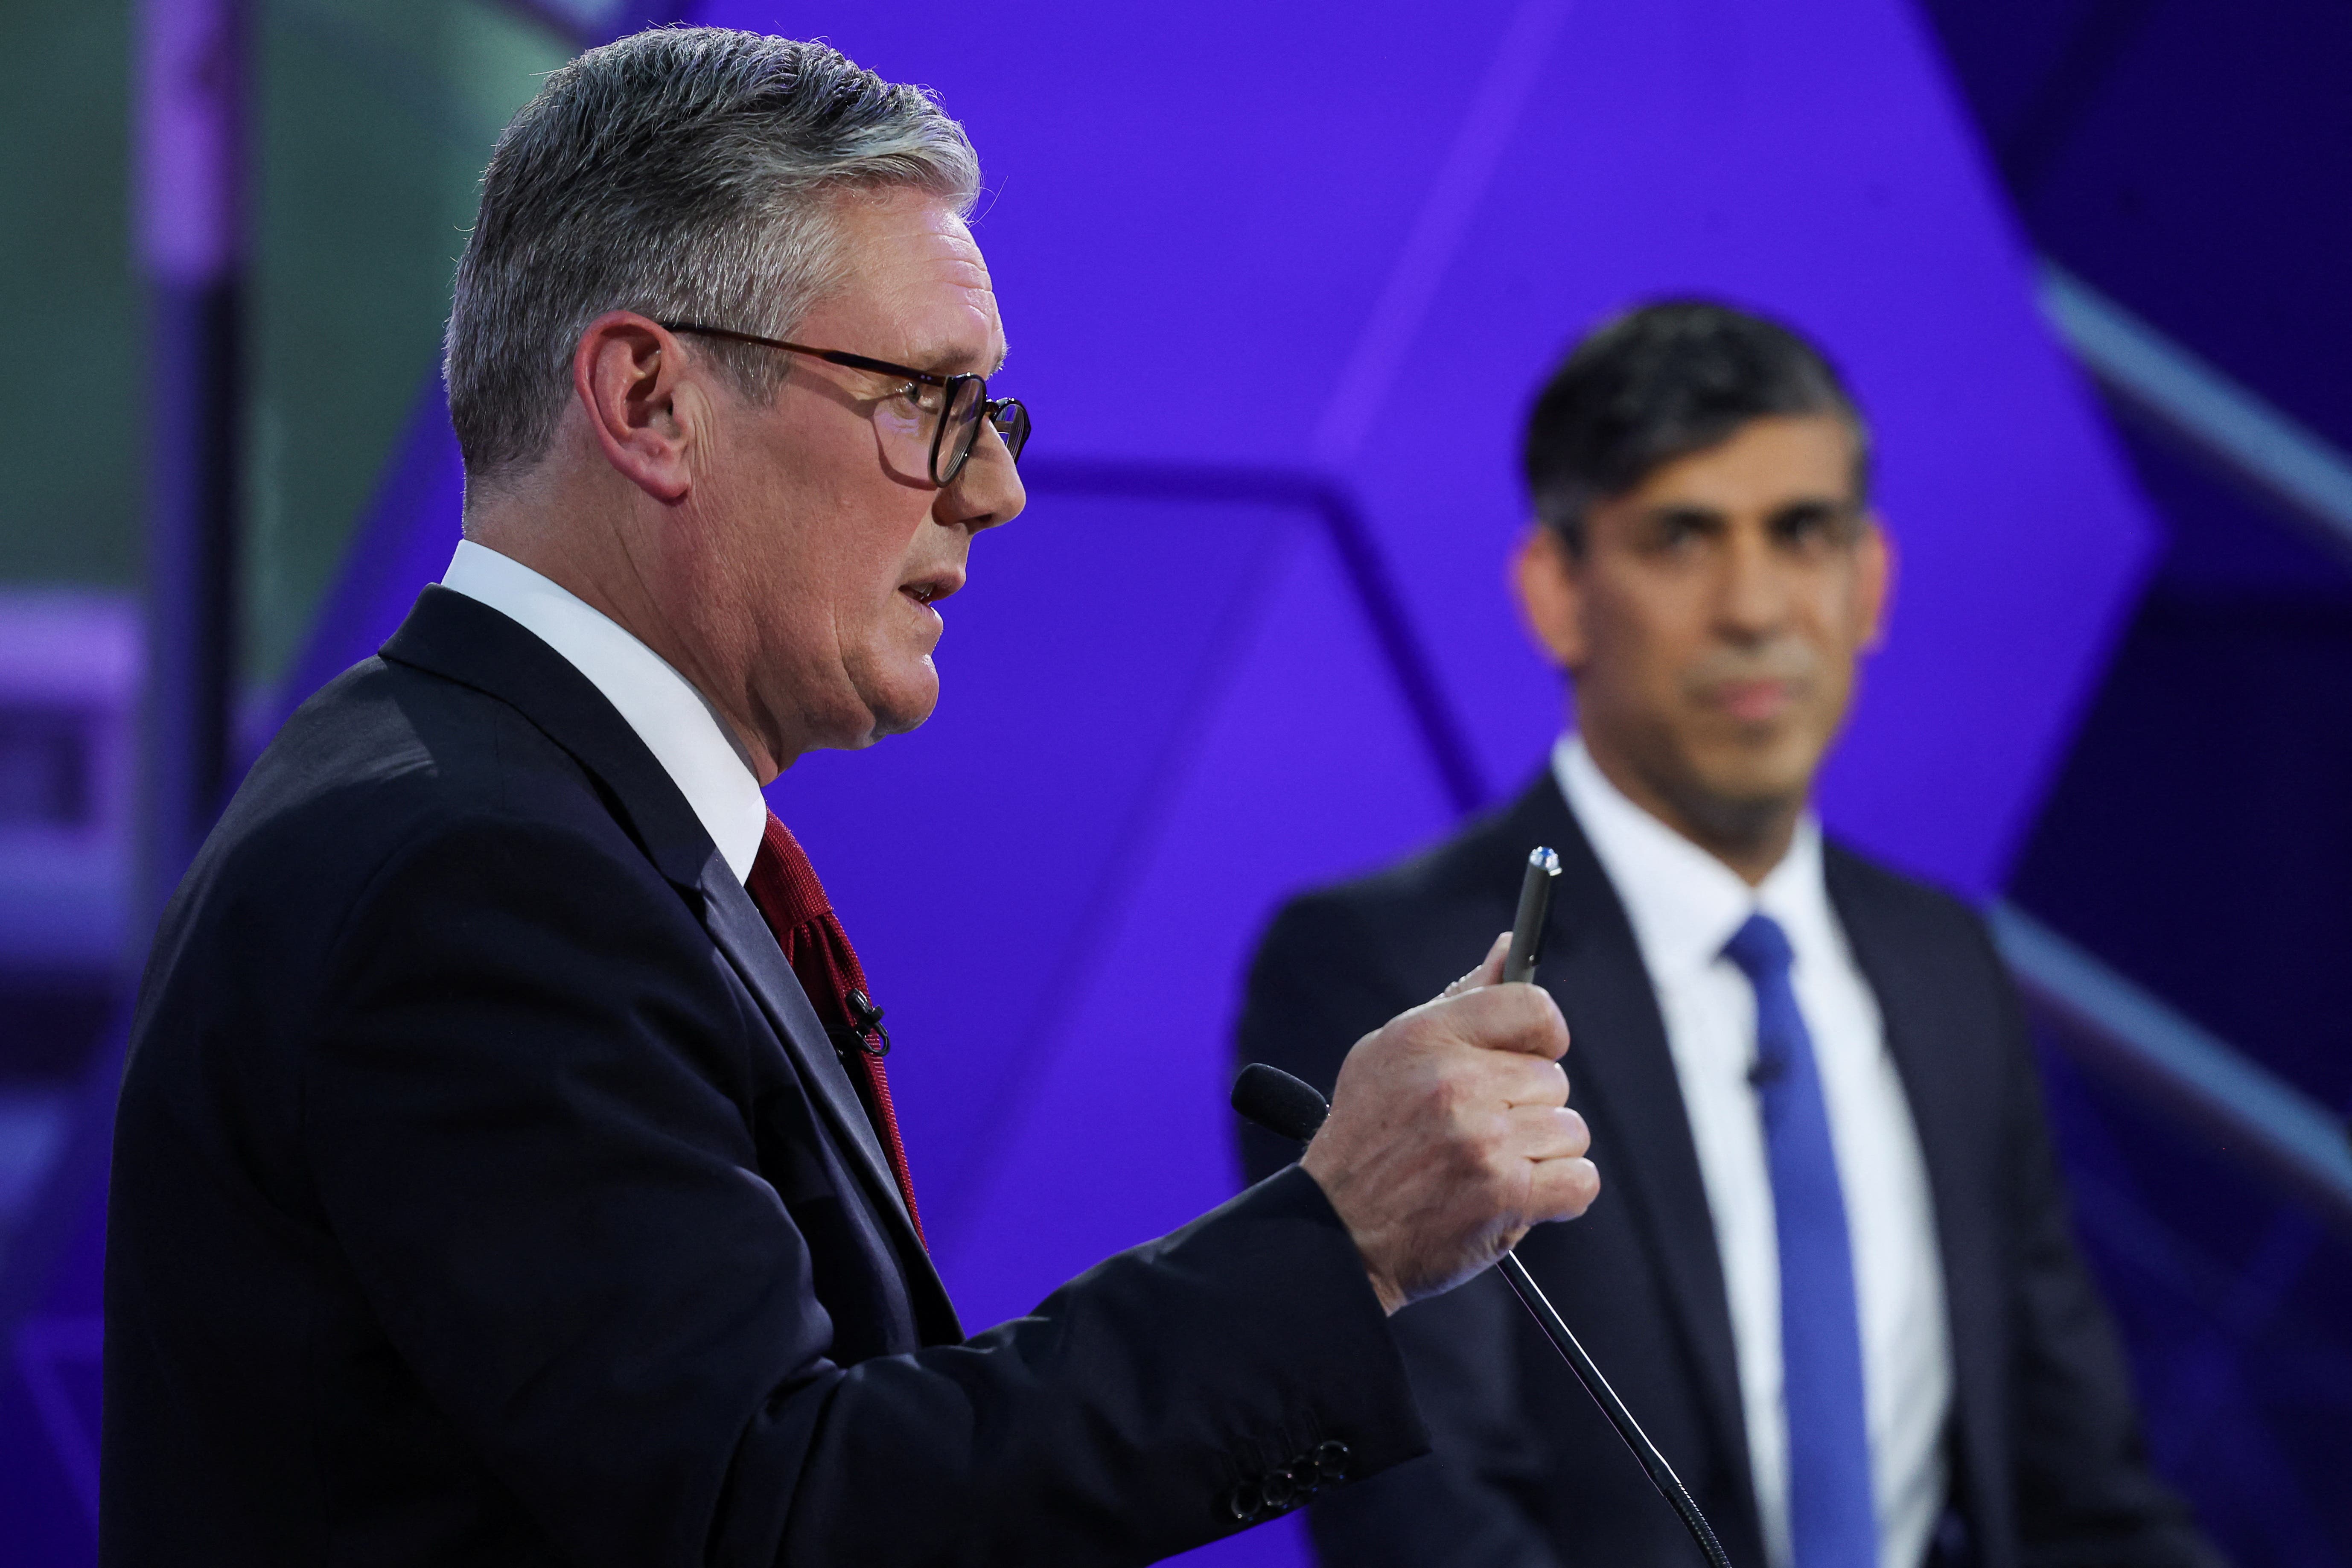 Sir Keir Starmer and Rishi Sunak clashged over betting in the final TV debate on Wednesday (Phil Noble/PA)